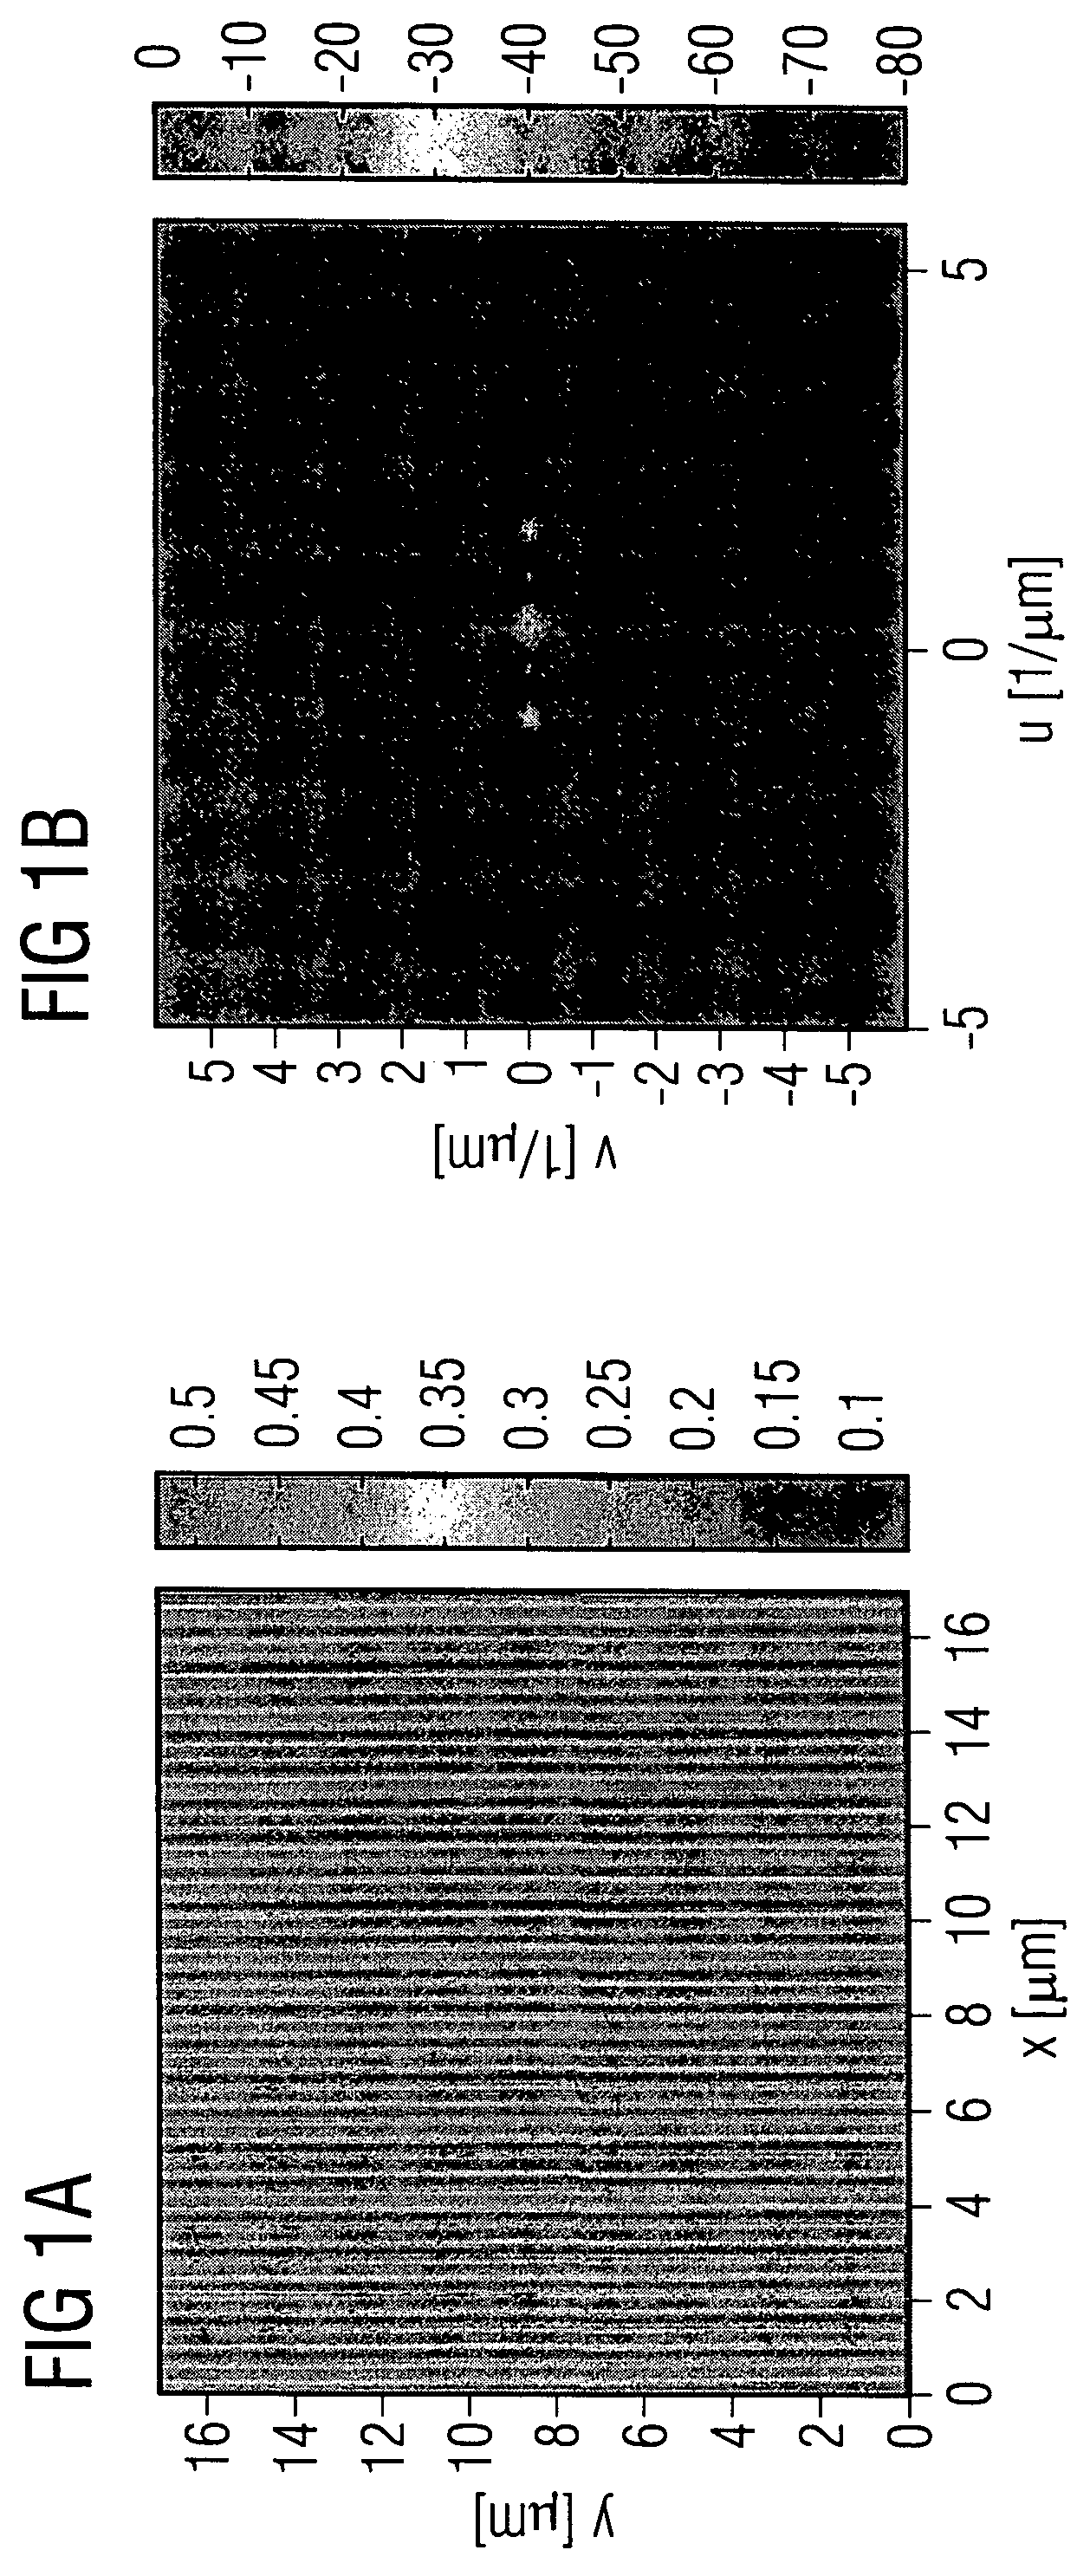 Method for inspection of periodic grating structures on lithography masks